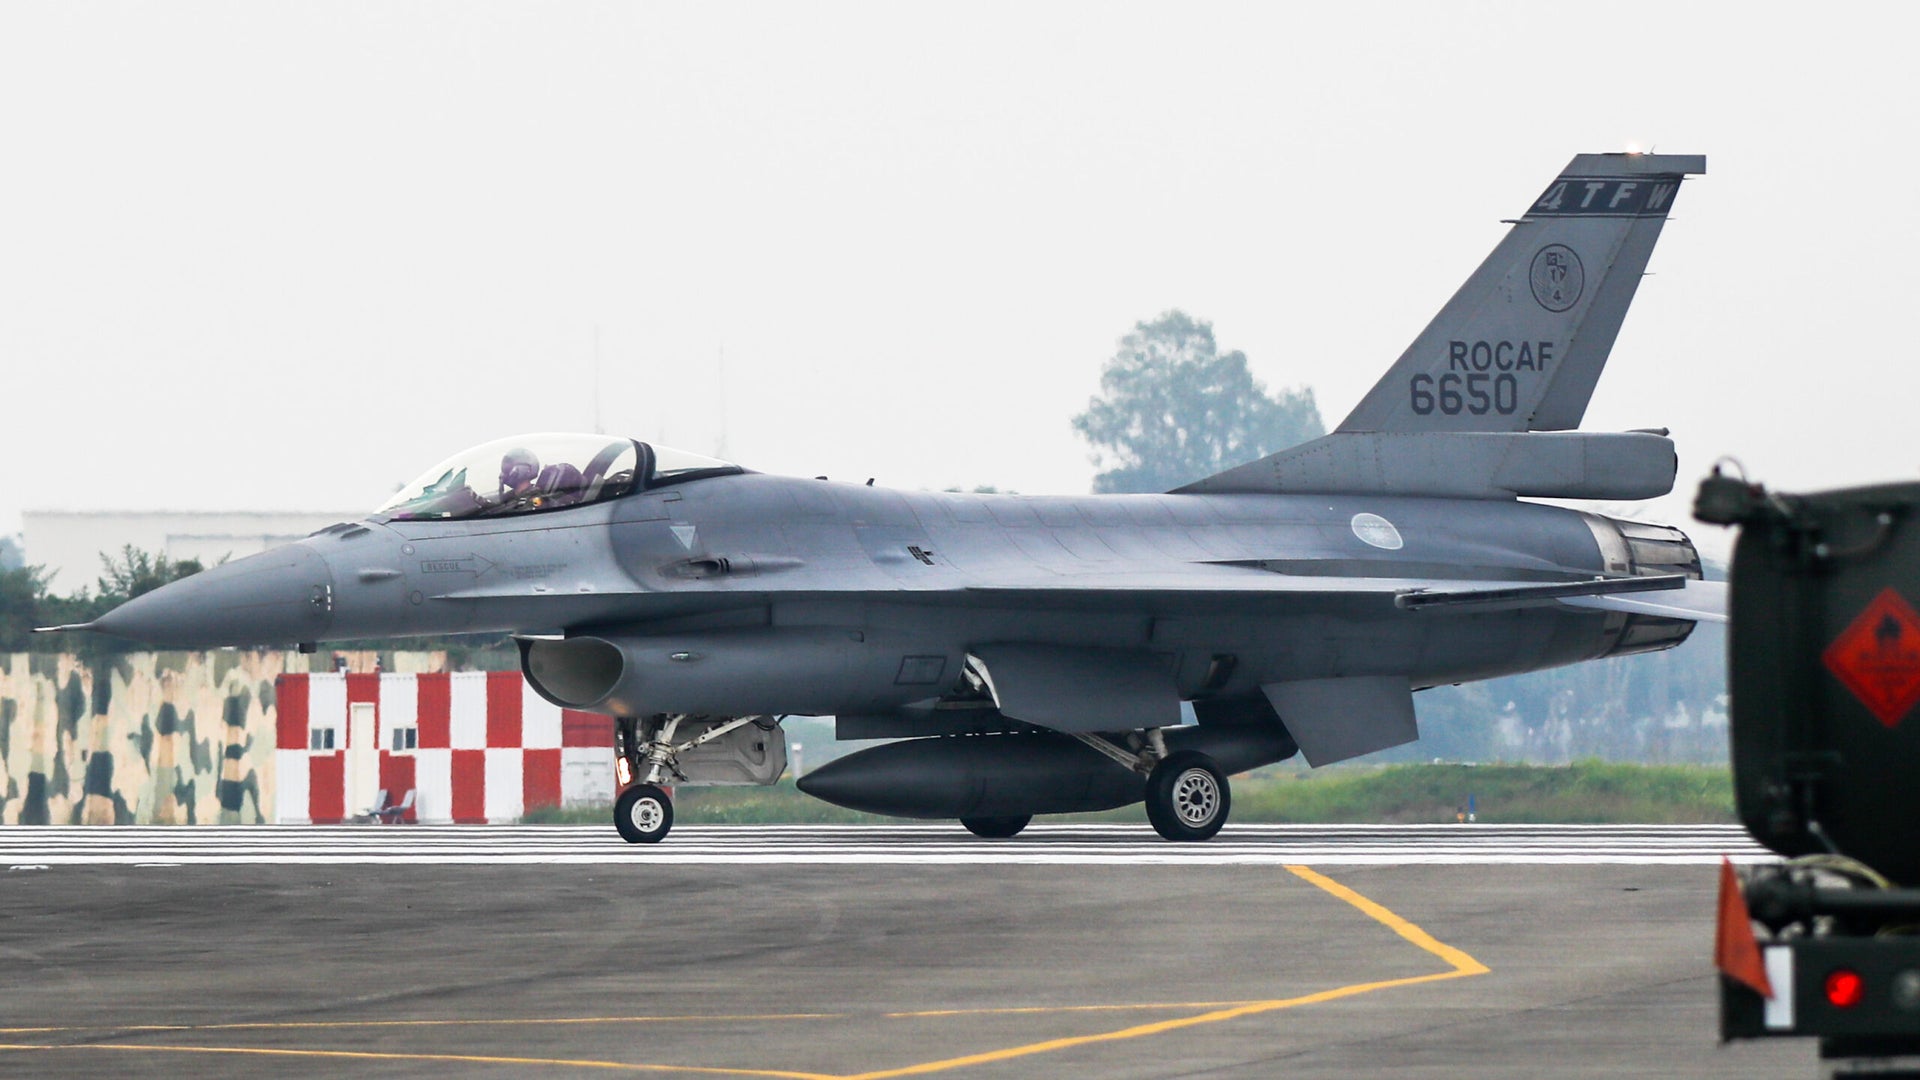 https://www.thedrive.com/content/2022/01/CHIAYI_F-16V_MISHAP-scaled.jpg?quality=85&amp;width=1920&amp;quality=70